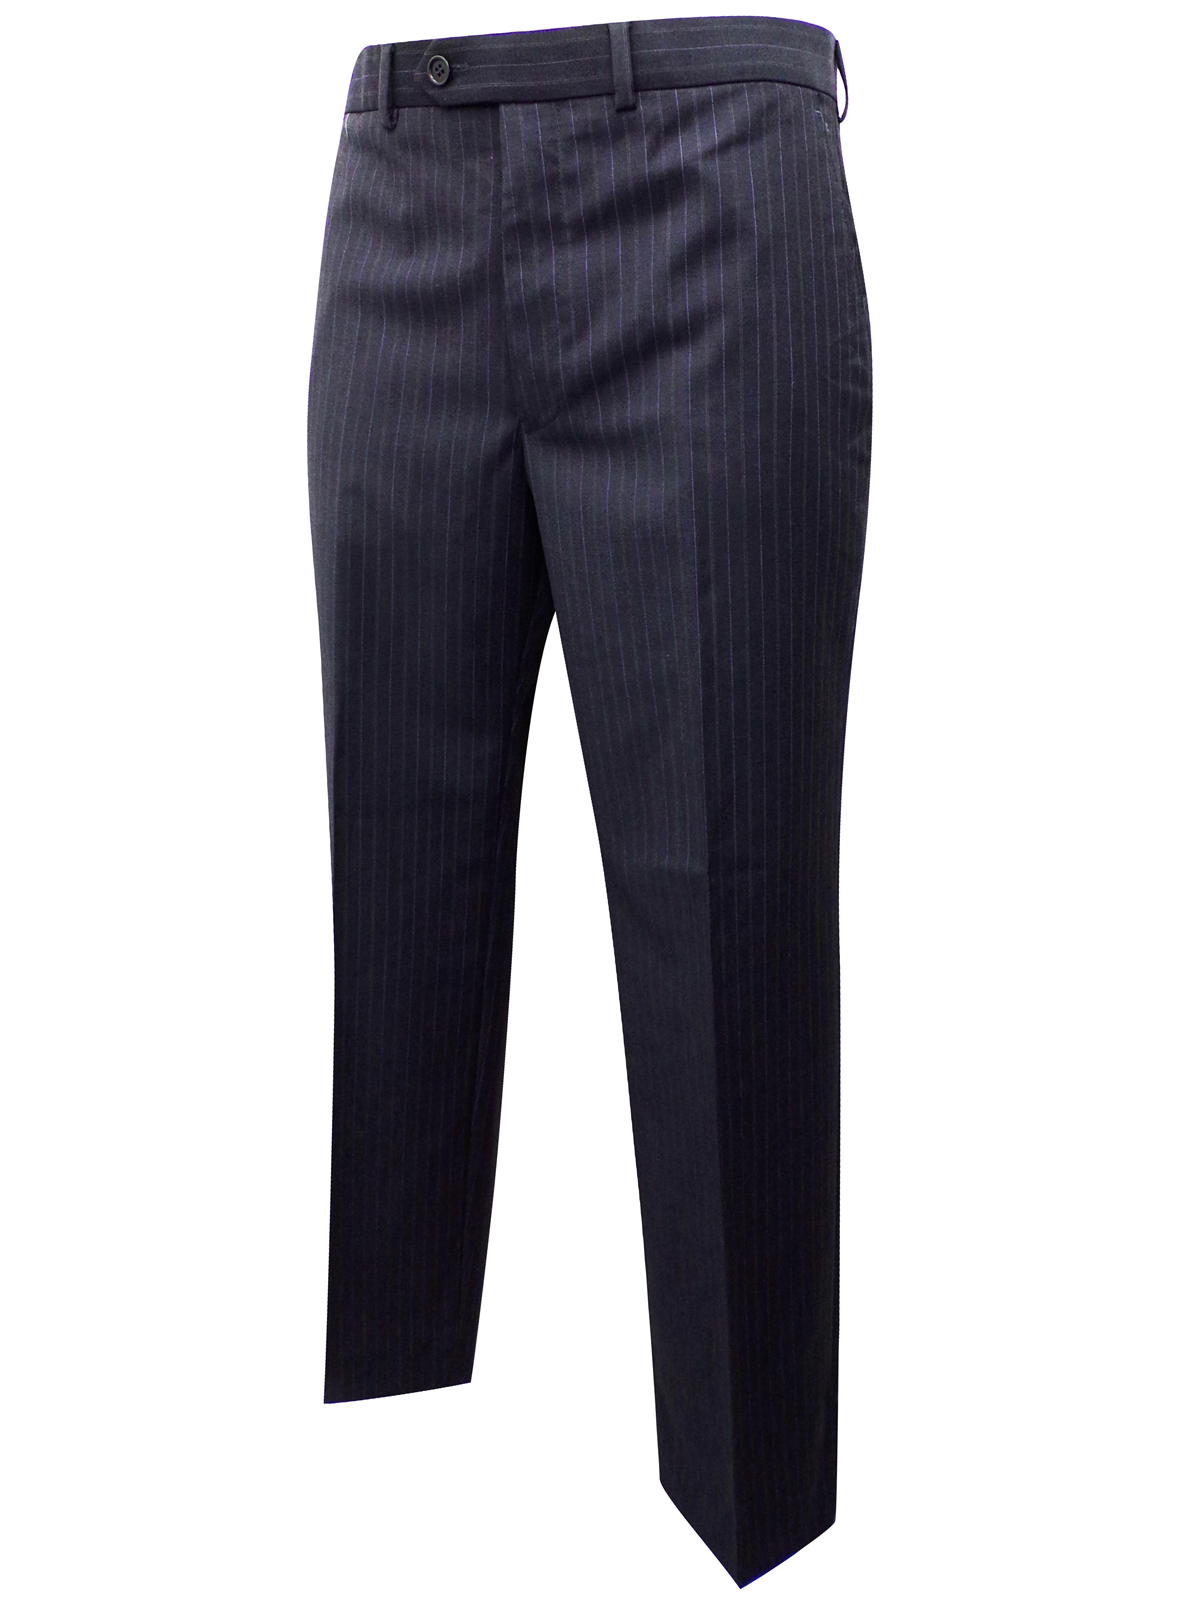 Marks and Spencer - - M&5 GREY Wool Blend Flat Front Pinstripe Trousers ...